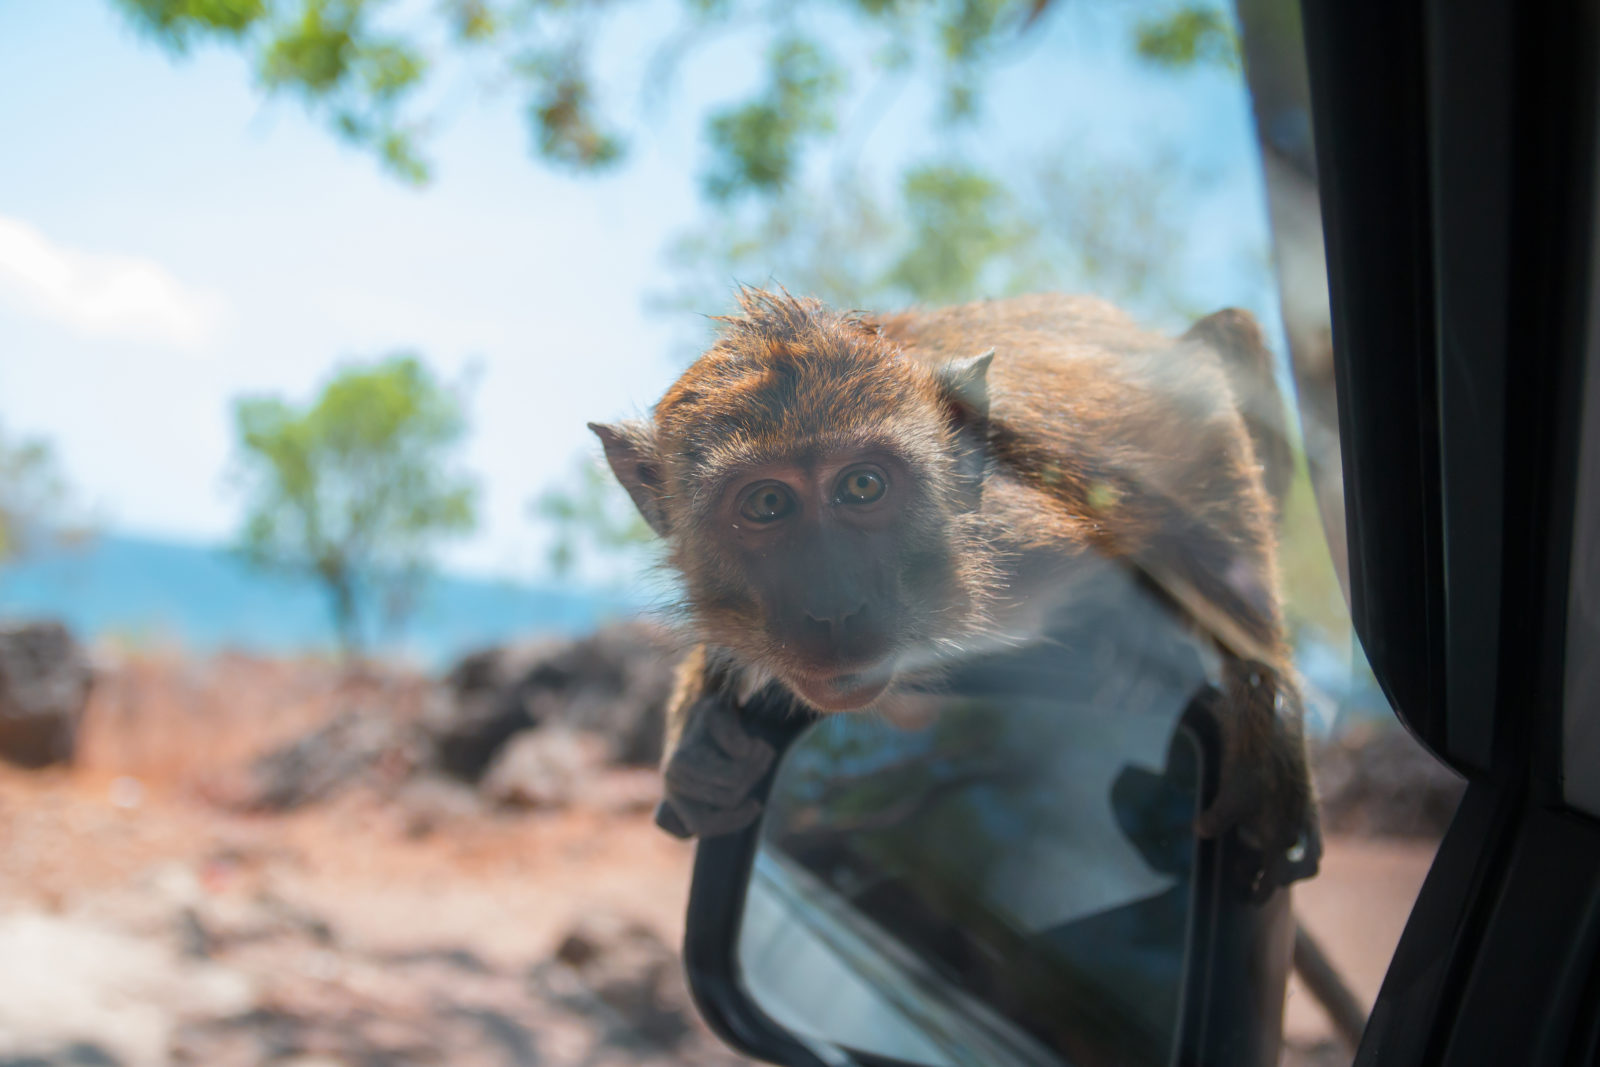 Sumba,Indonesia-September 2020: Little monkey at the car side mirror looking inside the car